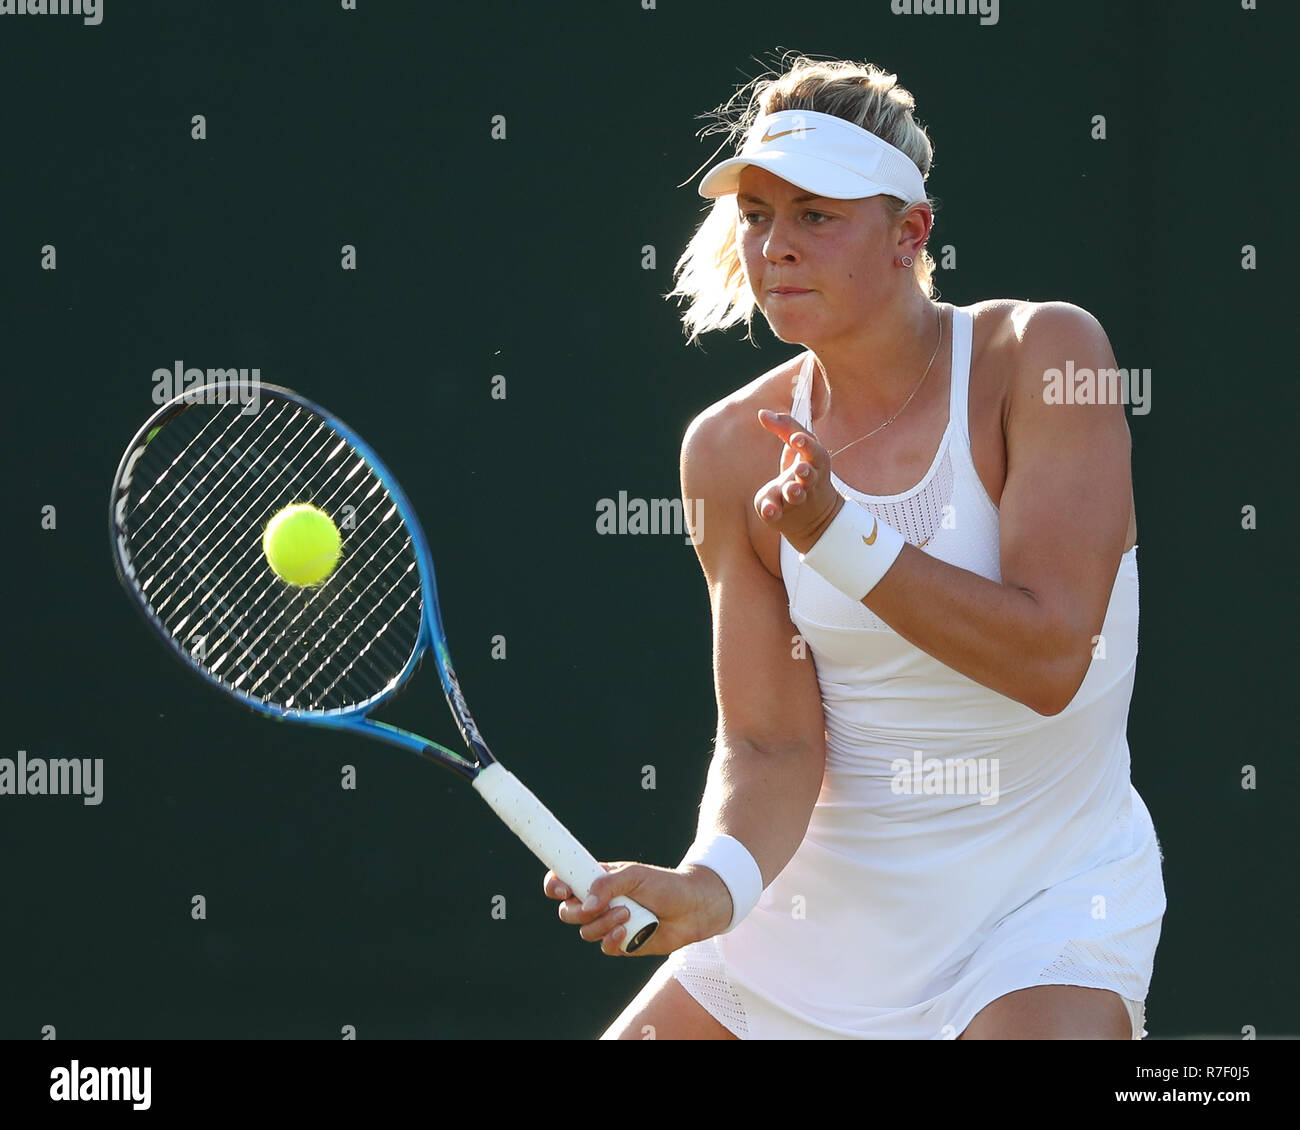 German player Carina Witthoeft in action at Wimbledon,London, United  Kingdom Stock Photo - Alamy